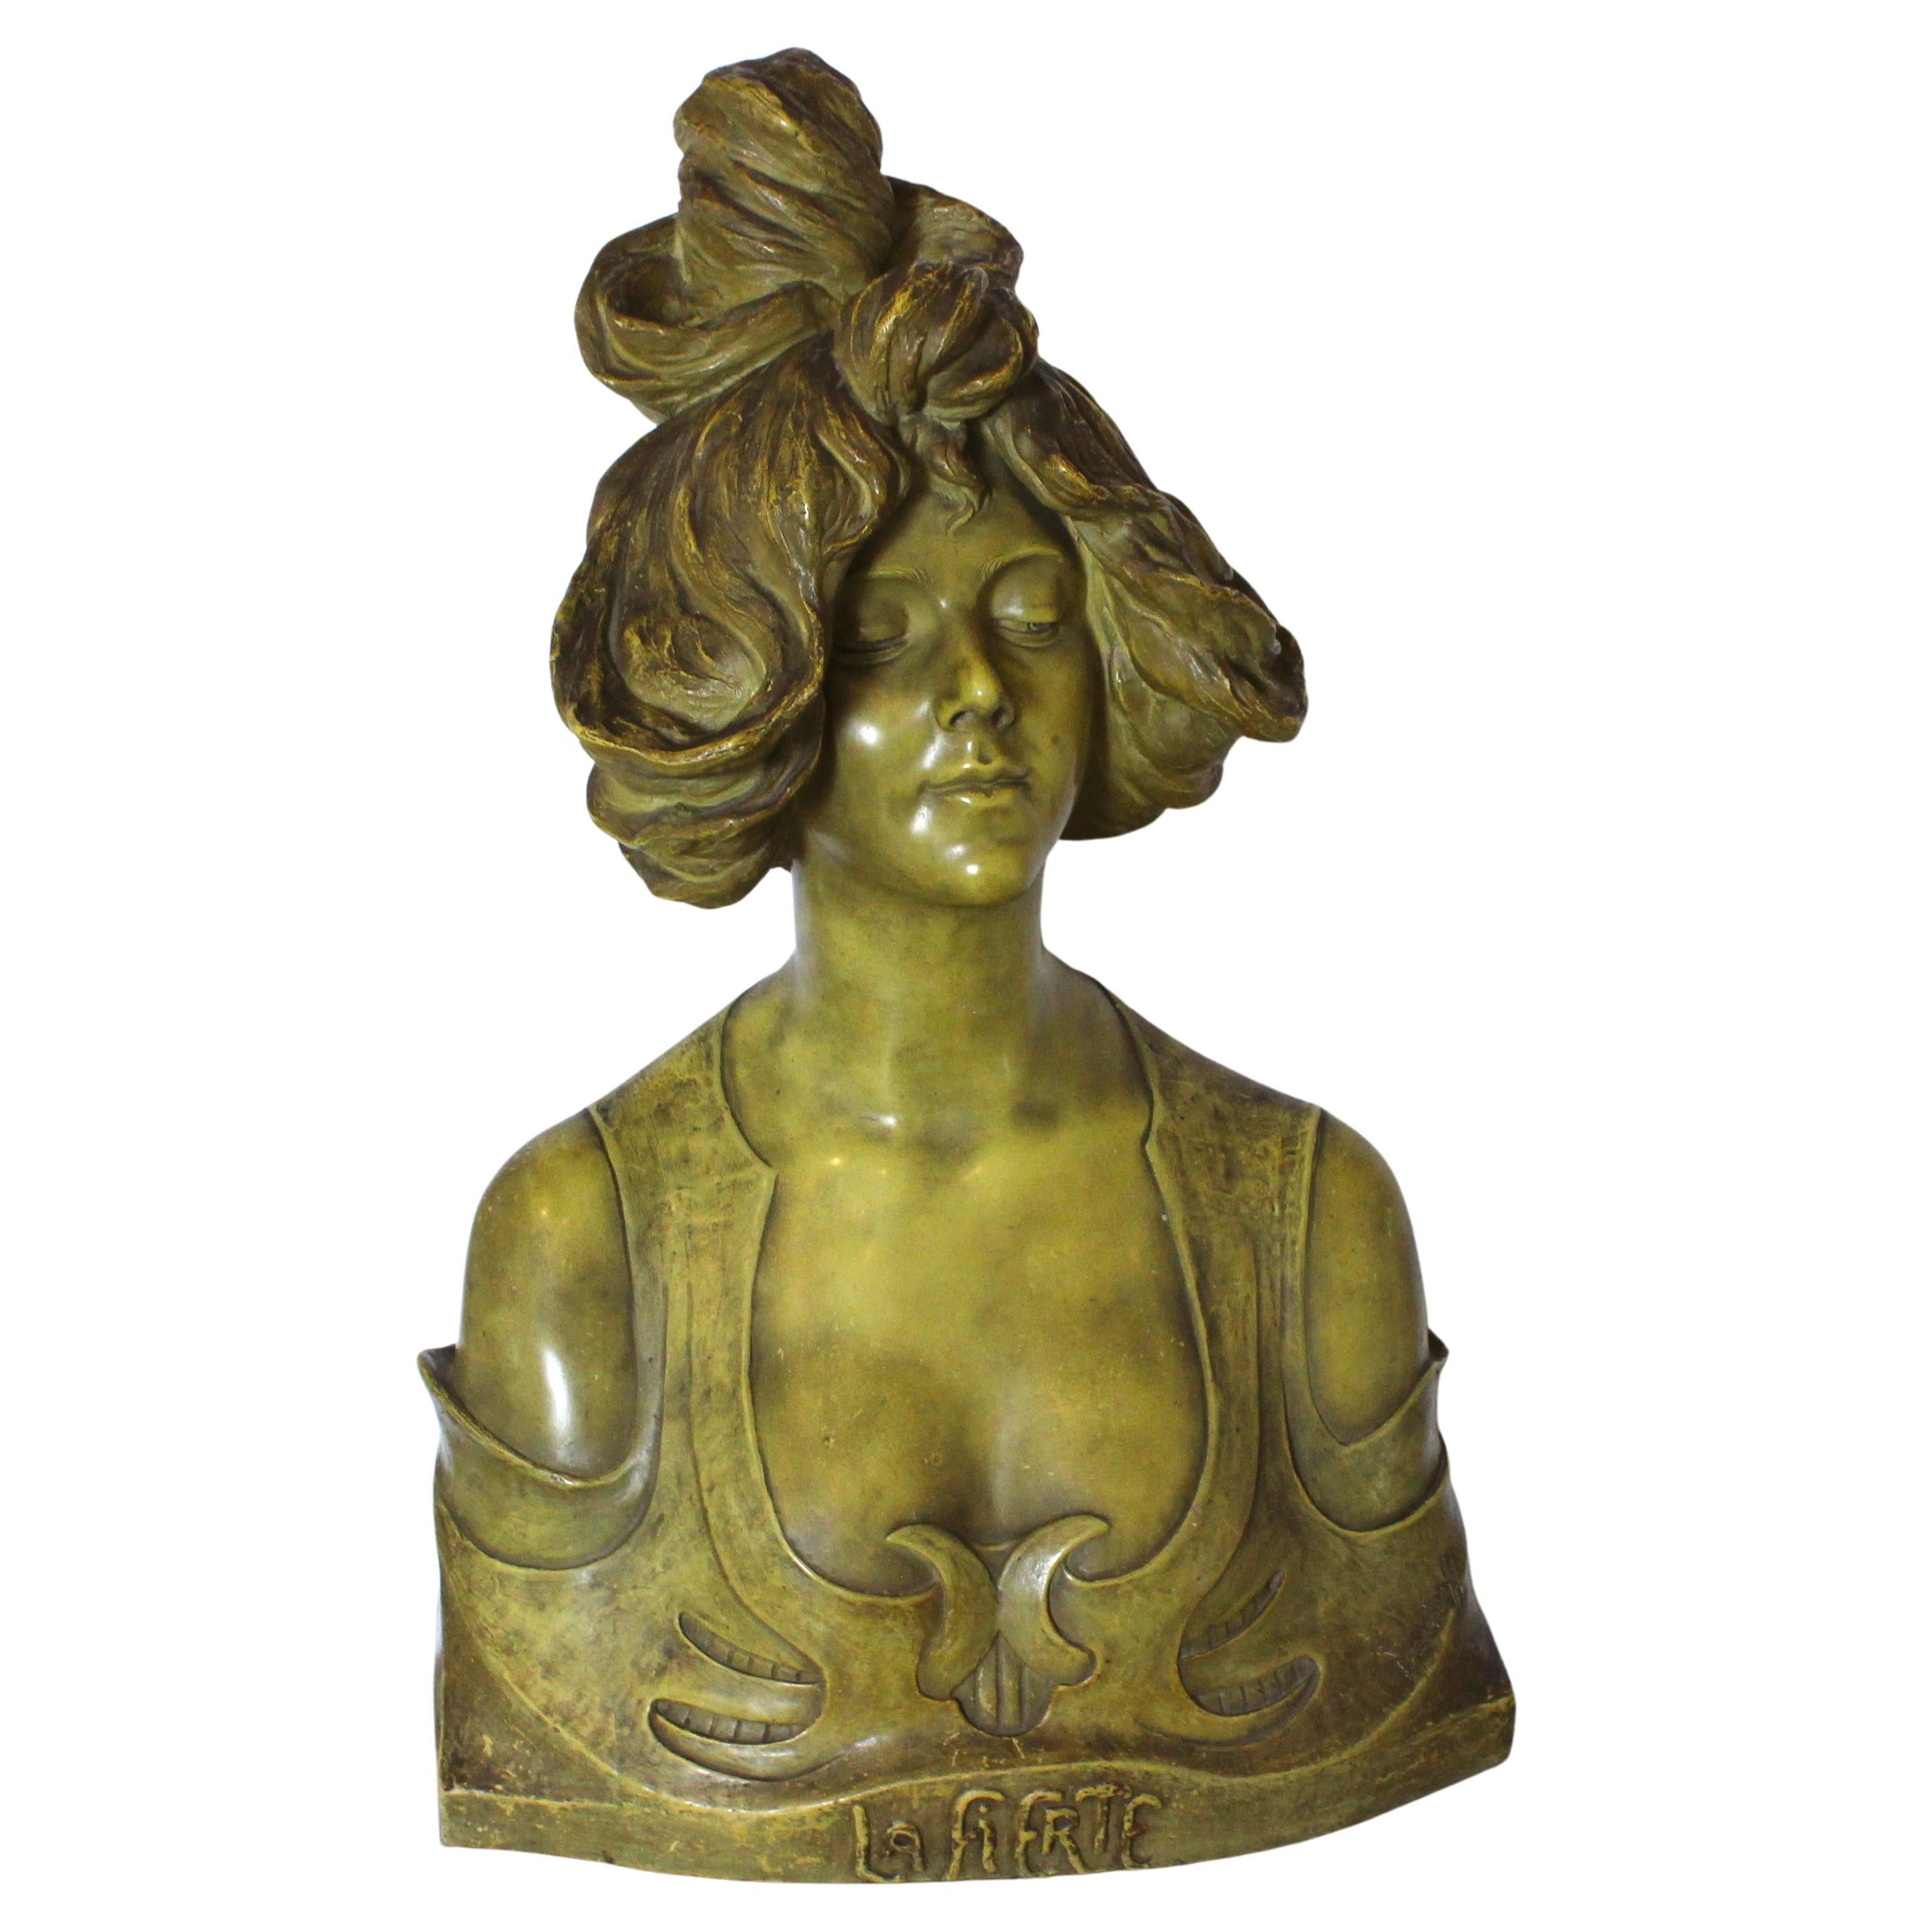 This stylish, chic and large scale bust of a young woman dates to the Art Nouveau period and was acquired from a Palm Beach estate. The sculptor was B. Haniroff, and it is fabricated in terracotta with a soft green translucent, patinated glaze.